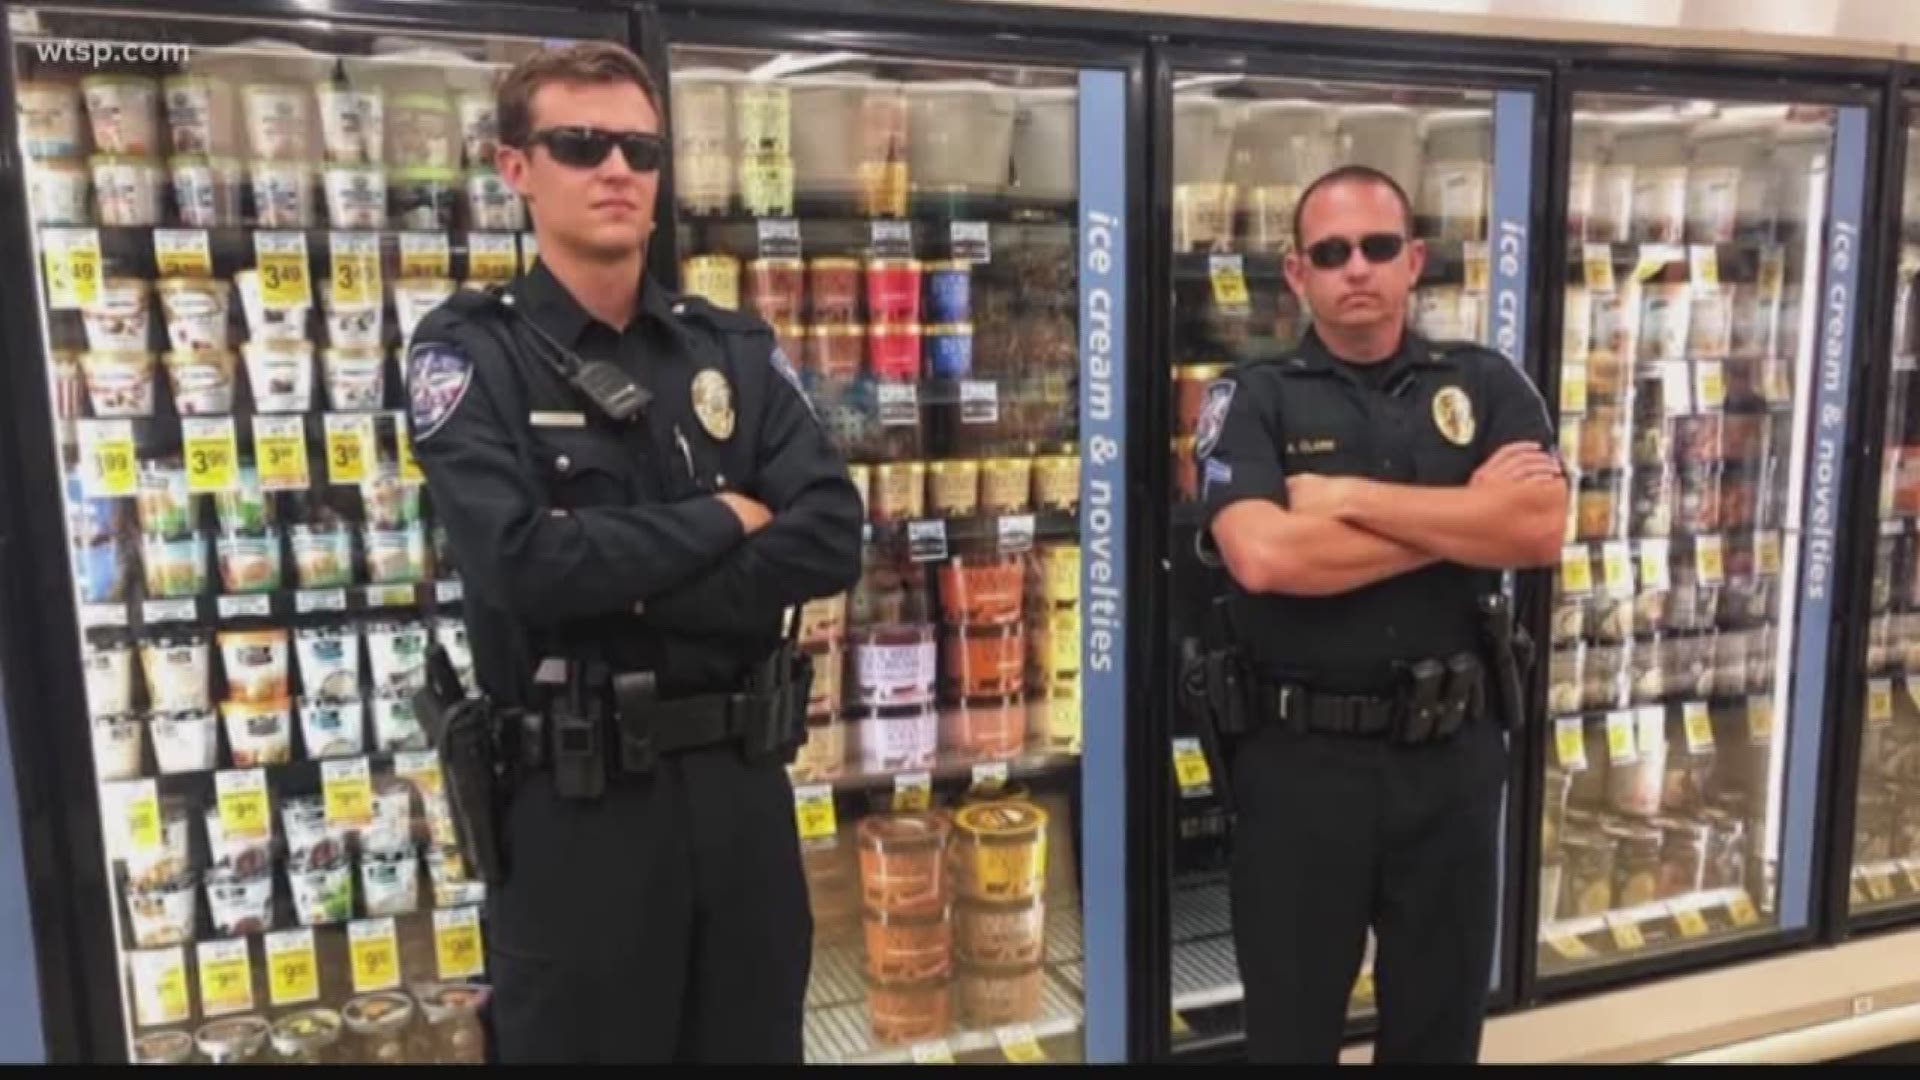 One Texas police department isn’t going to let anyone lick their Blue Bell ice cream and put it back.

The Keller Public Safety Facebook page has a post showing two of its officers standing guard in a supermarket’s ice cream section. The photo comes after a viral video showed a woman licking some Blue Bell ice cream and putting it back on the shelf.